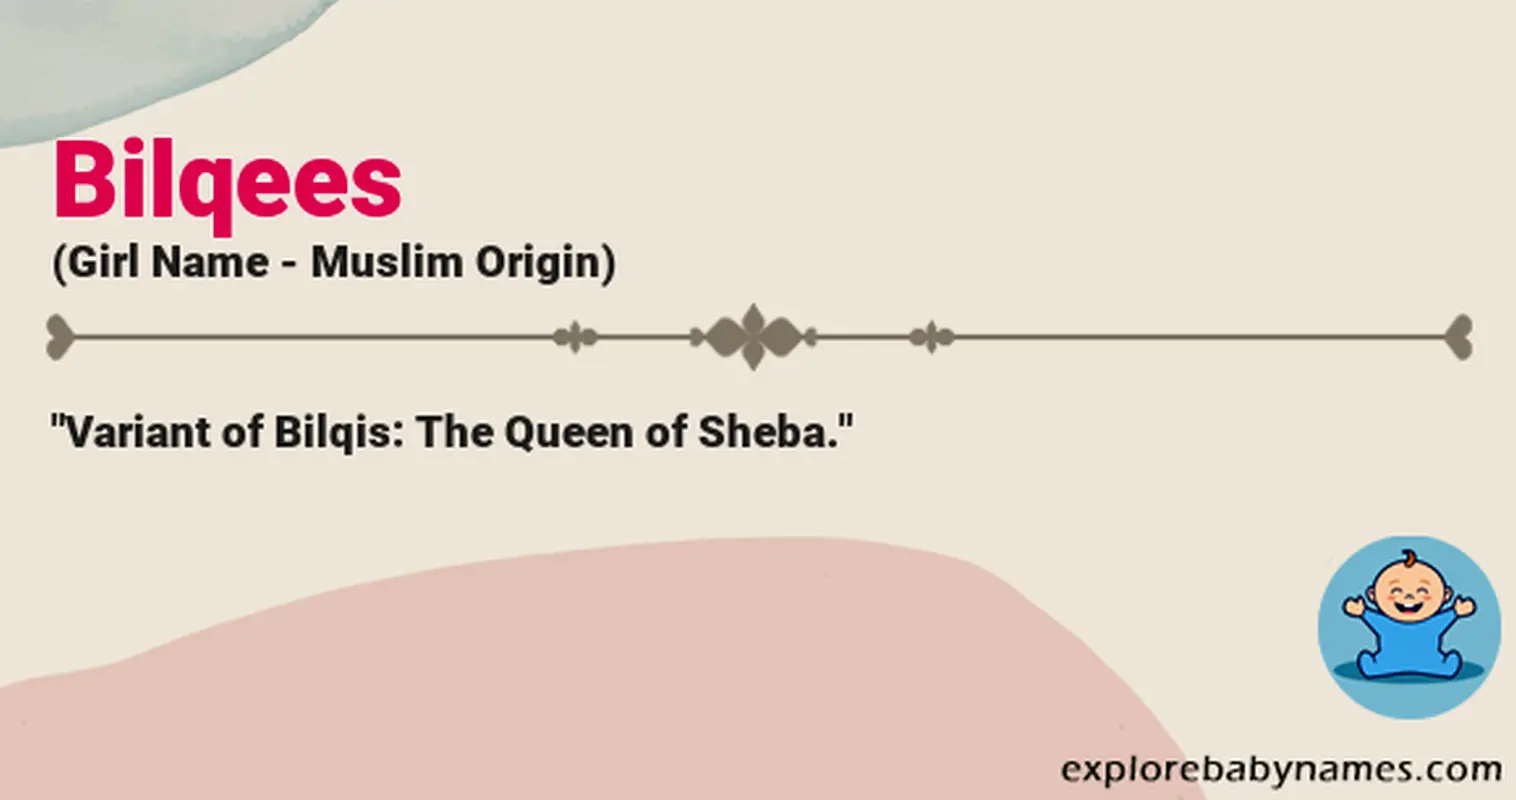 Meaning of Bilqees